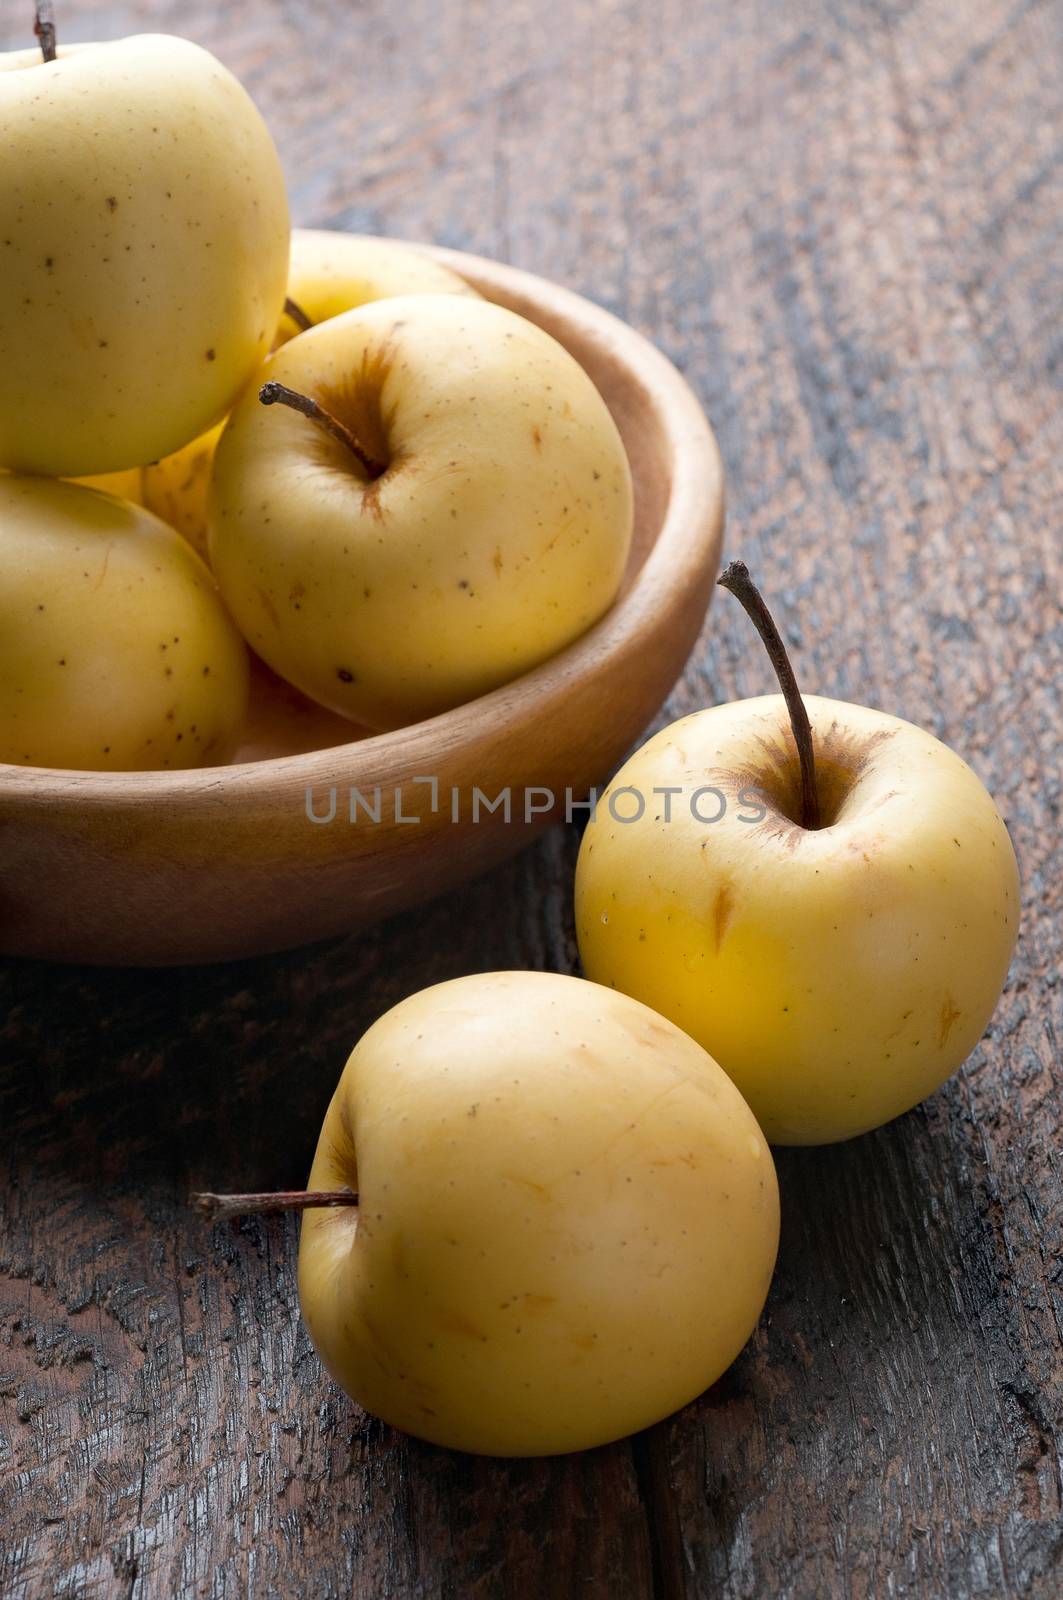 a few green apples in a wooden bowl on the table